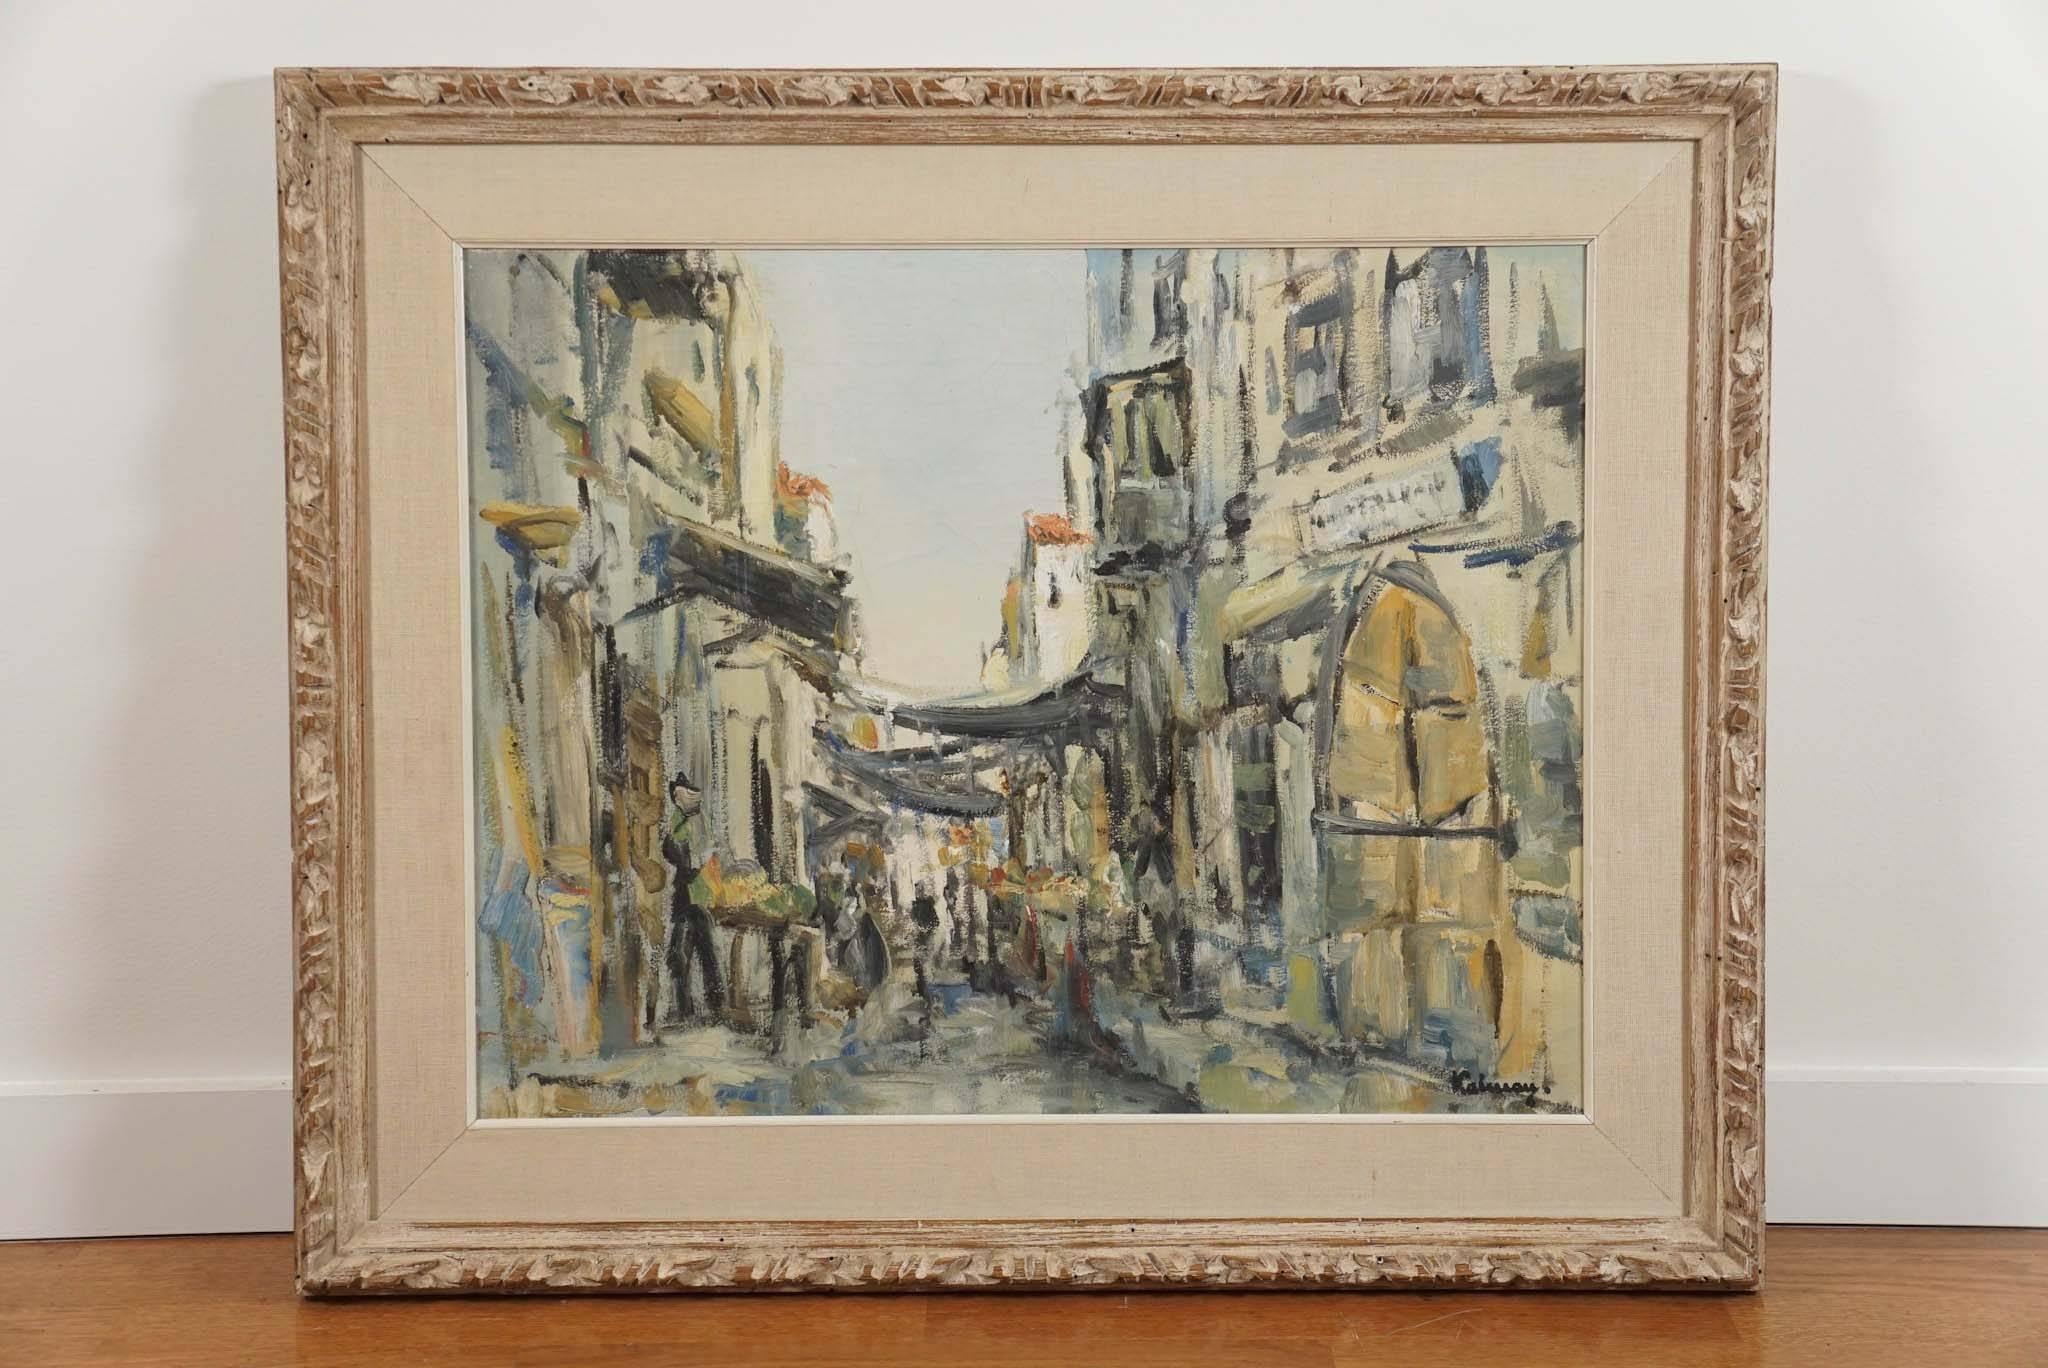 Unknown French artist.
Parisian street scene, oil on canvas.
Ask about other similar French oil paintings, available in our store.